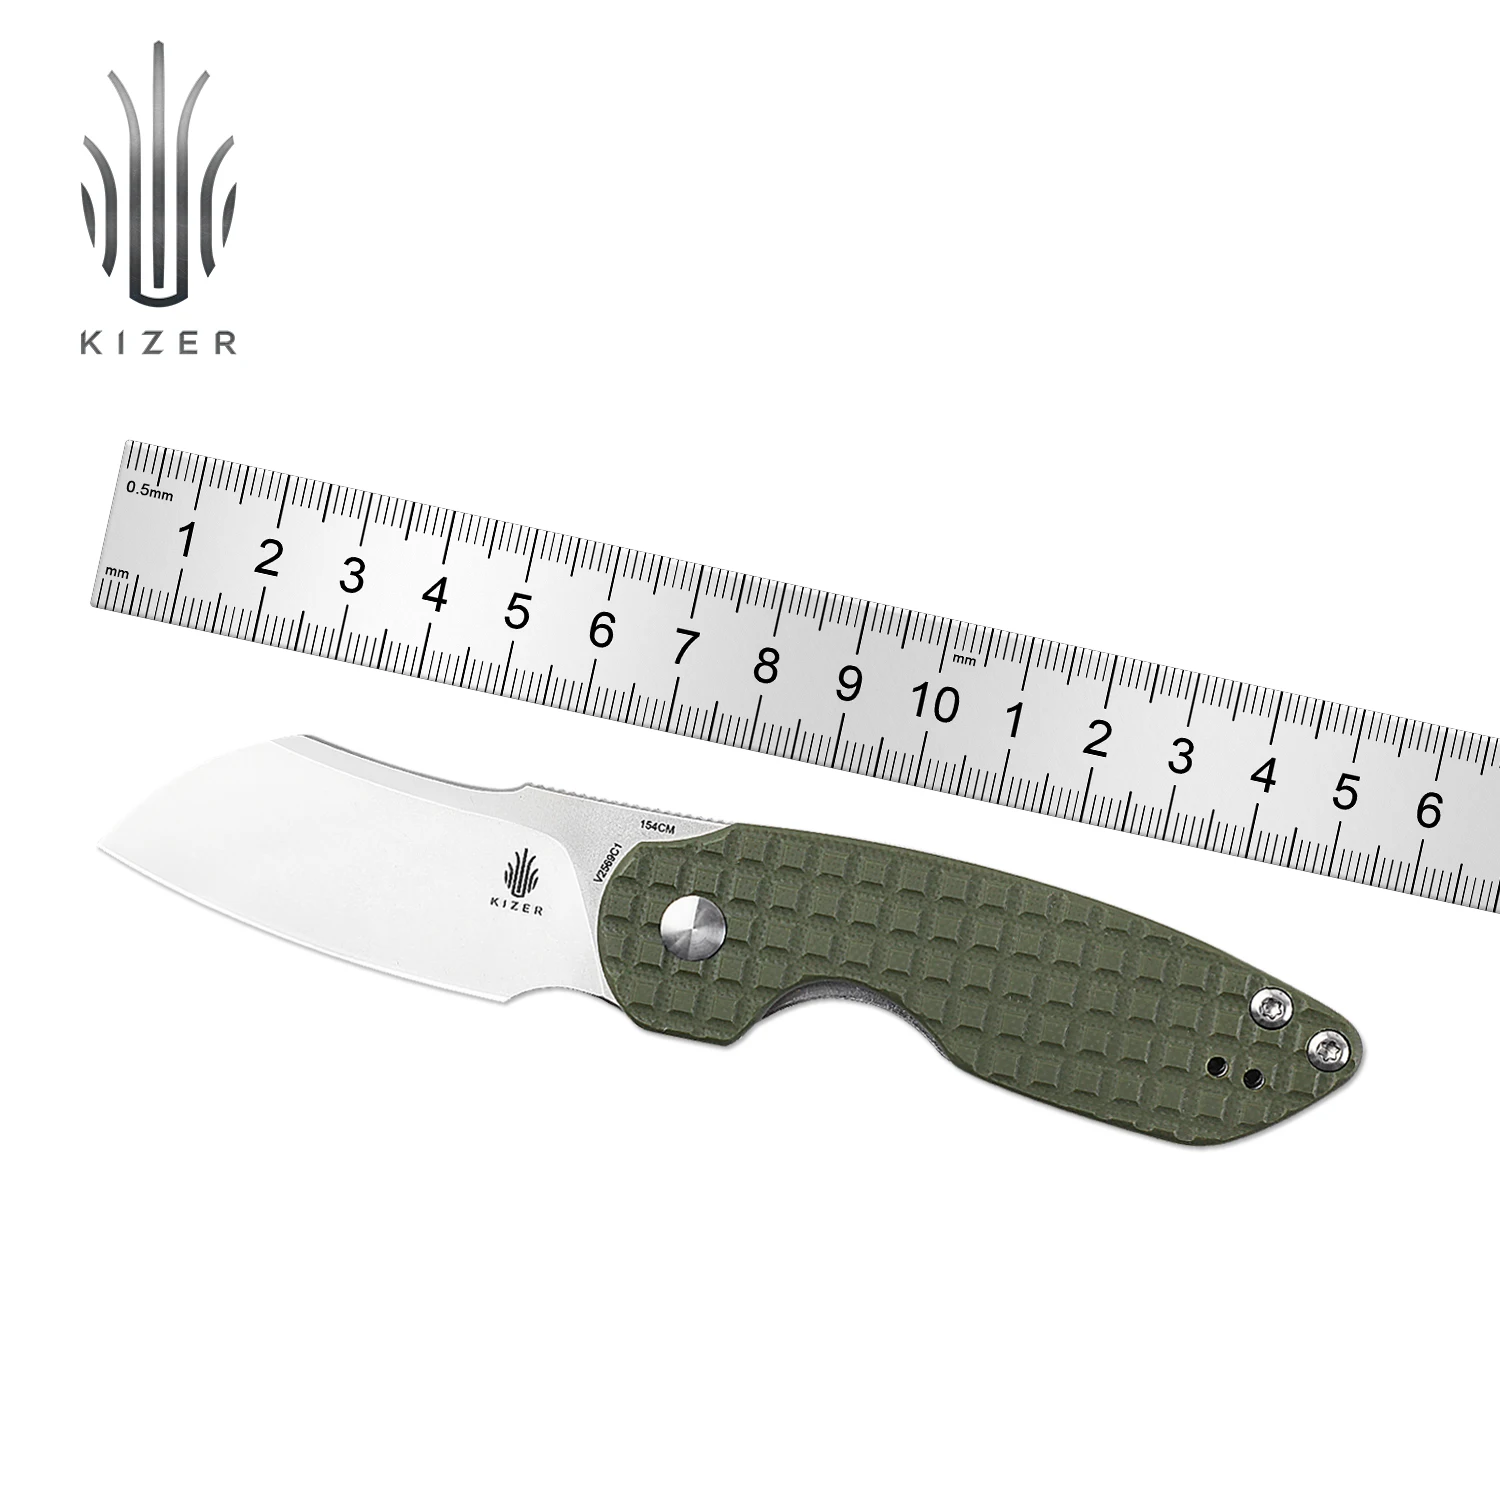 Kizer Pocket Knife OCTOBER Mini V2569C1 2022 New Ball Bearing Tactical Knife with Green G10 Handle High Quality Hand Tools